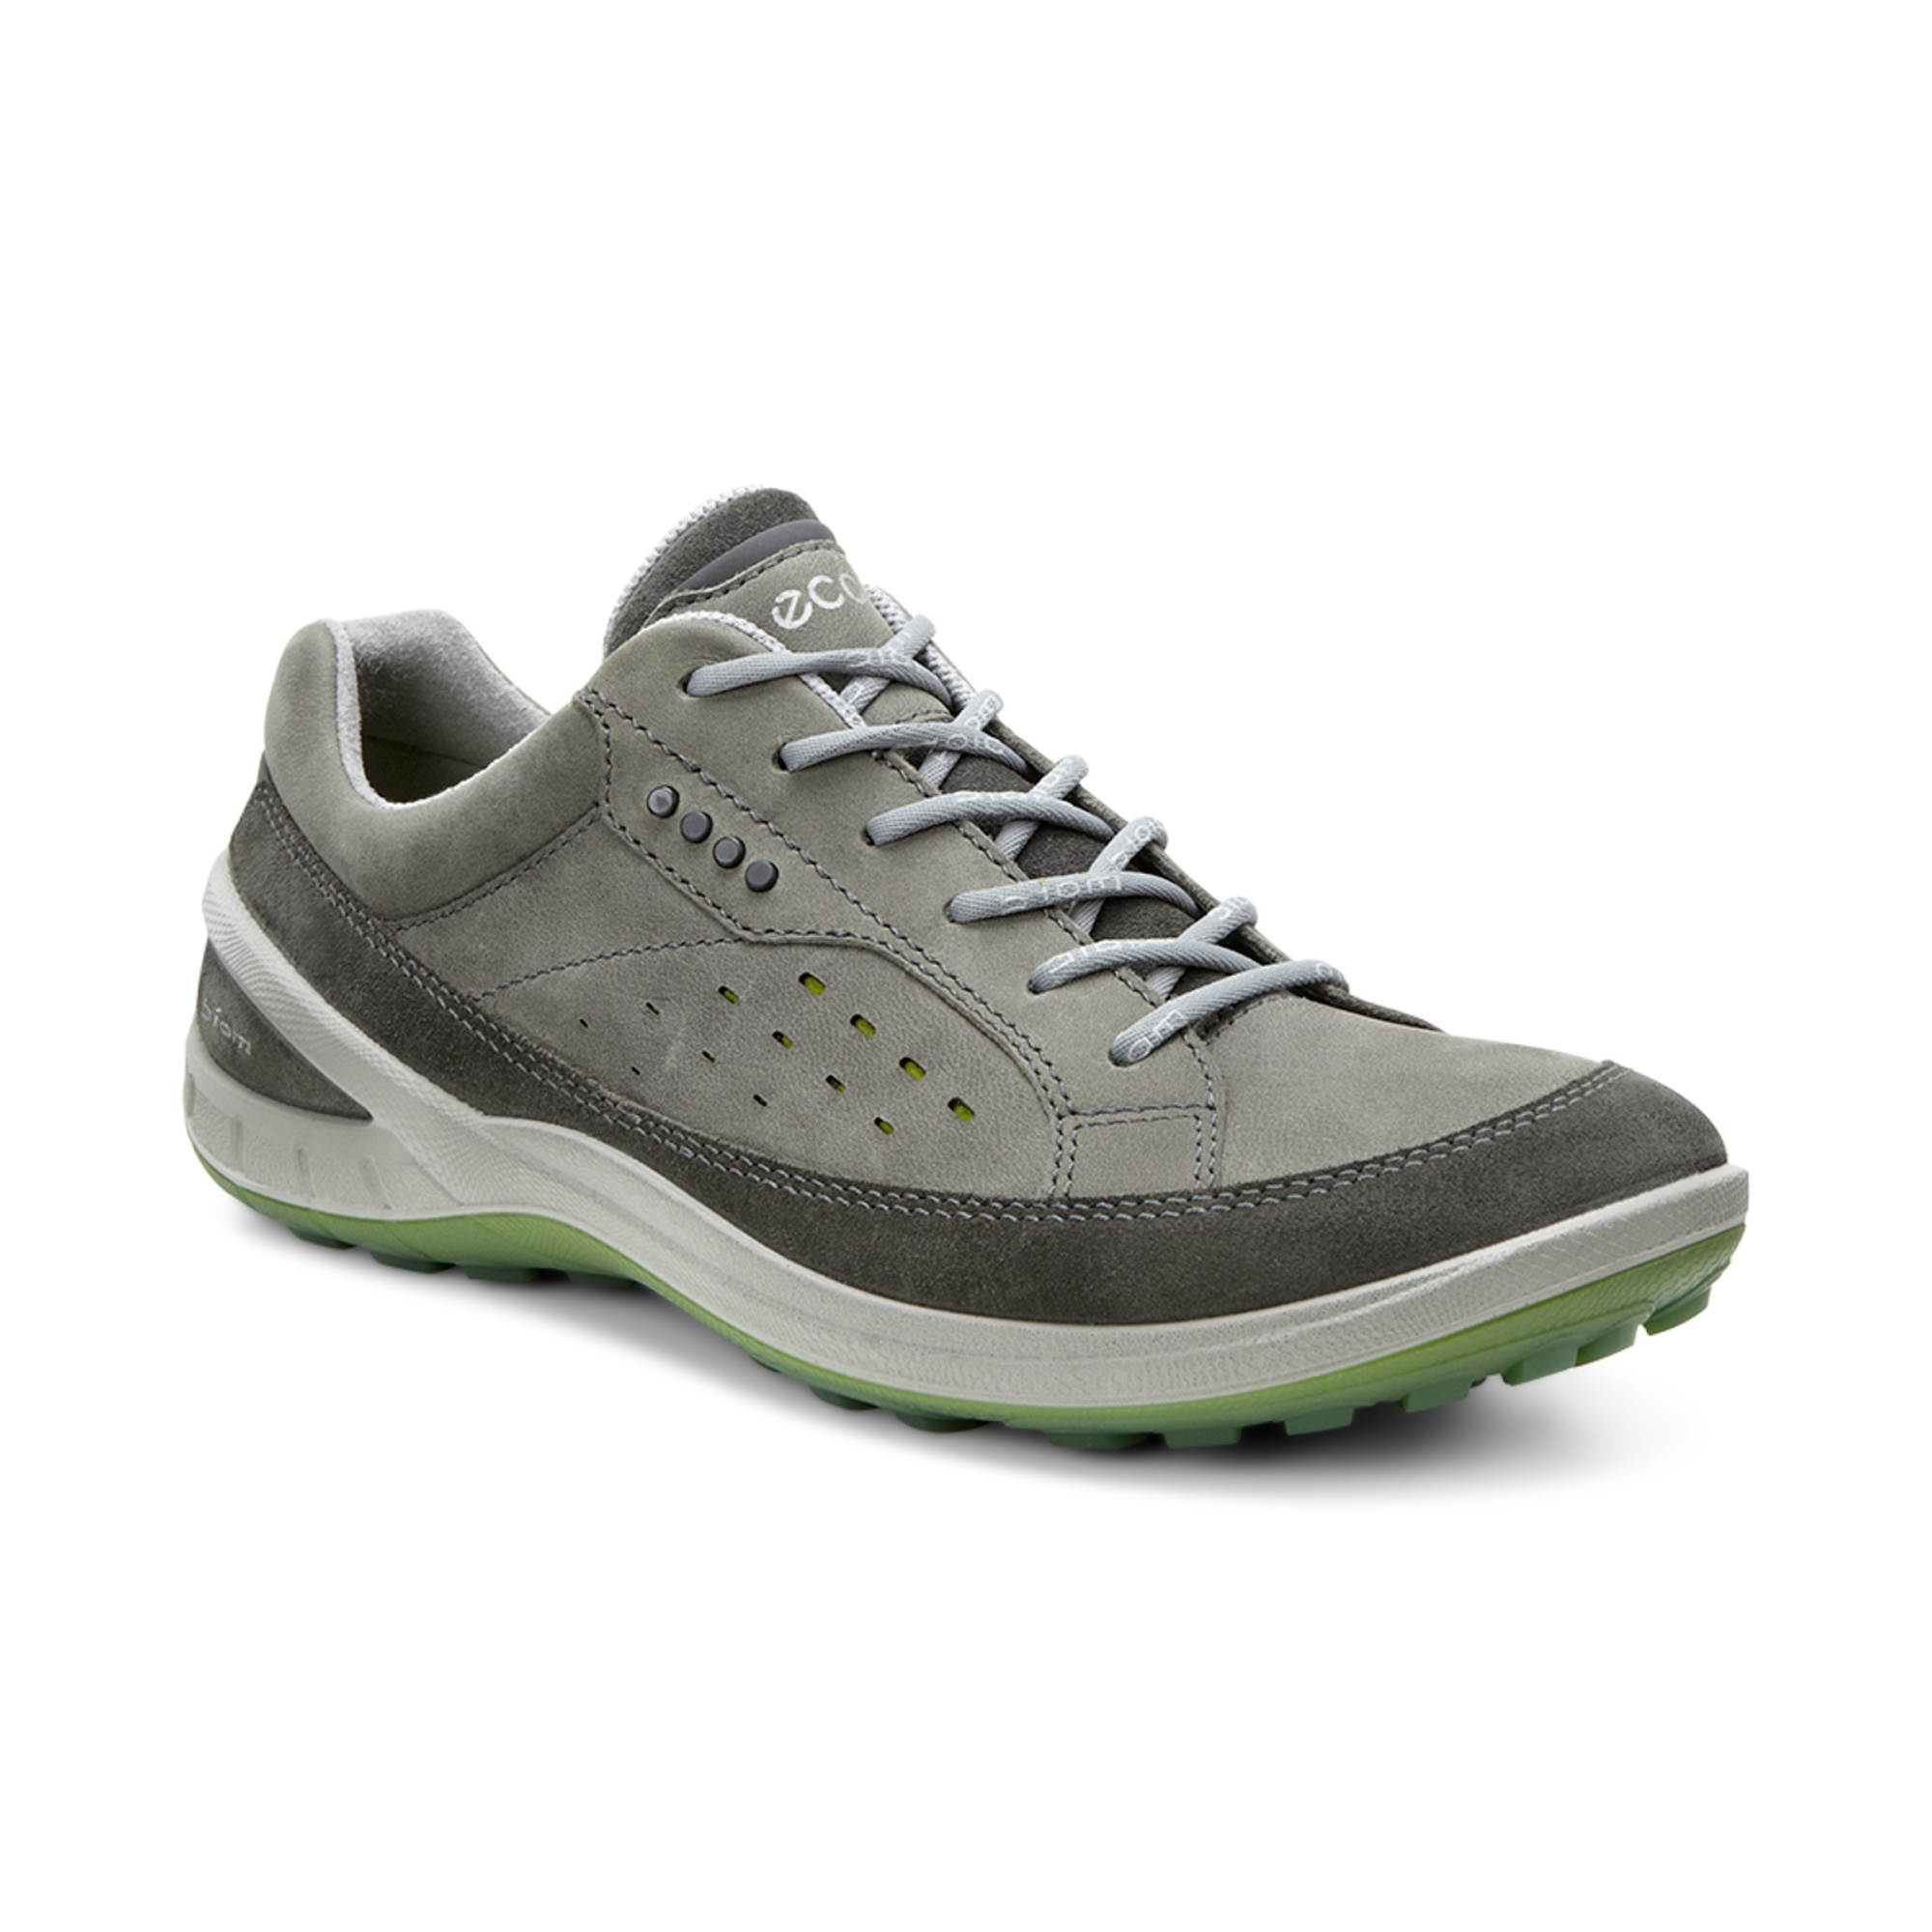 Ecco Mens BIOM II 44 - Products - Veryk Mall - Veryk Mall, many product, response, safe your money!